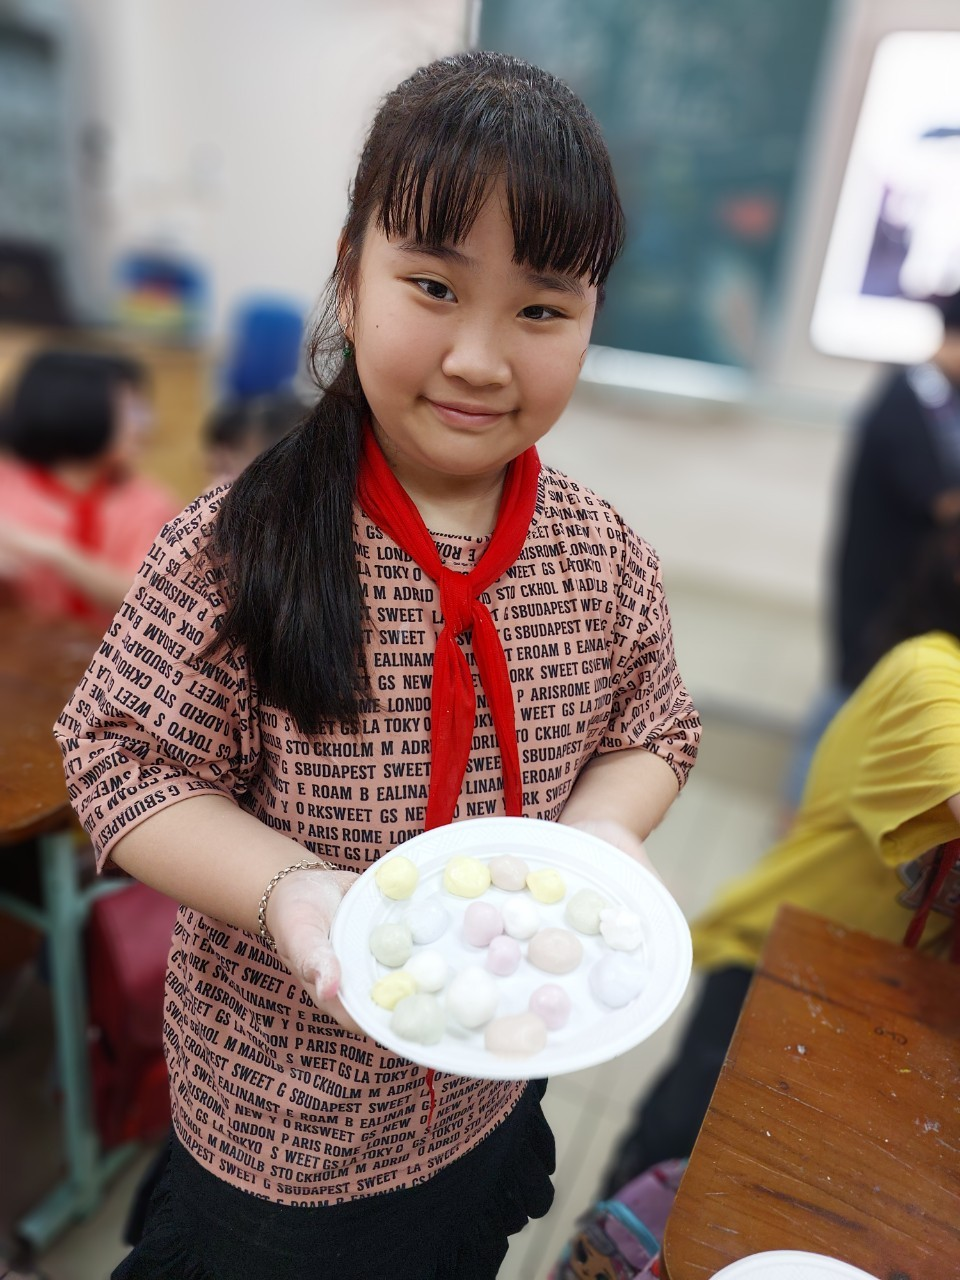 A child holding a plate of food

Description automatically generated